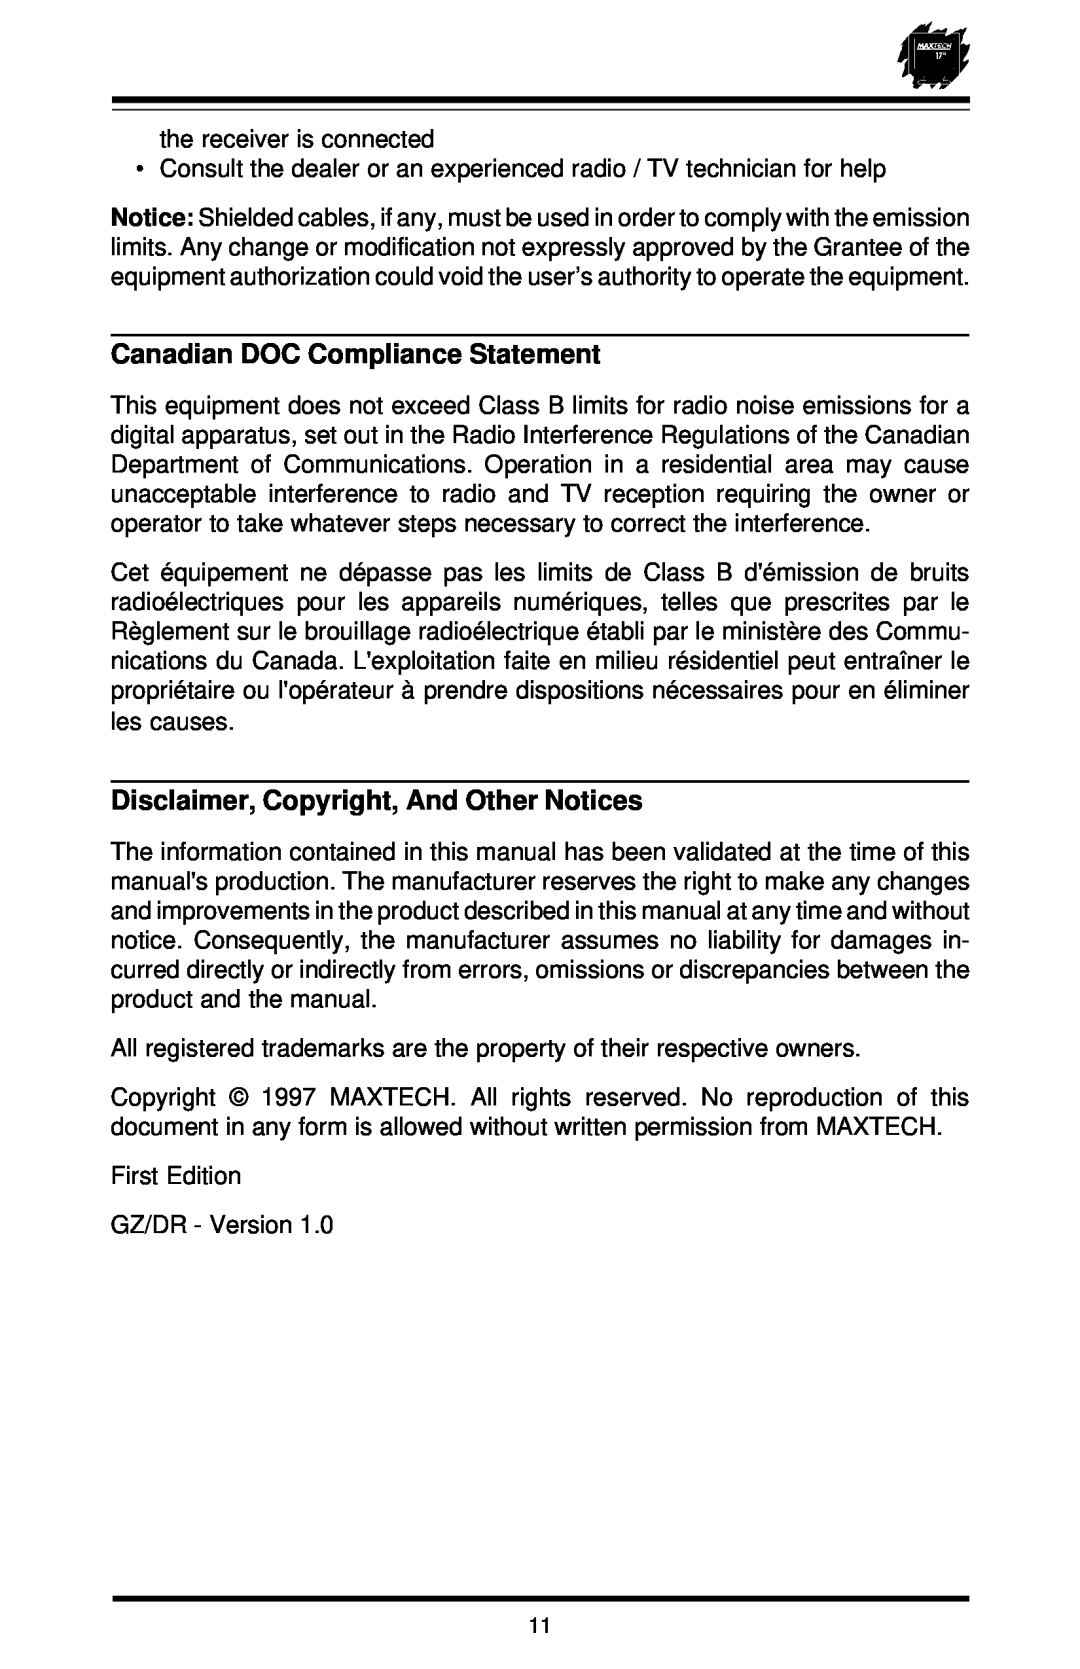 MaxTech XT-7871 user manual Canadian DOC Compliance Statement, Disclaimer, Copyright, And Other Notices 